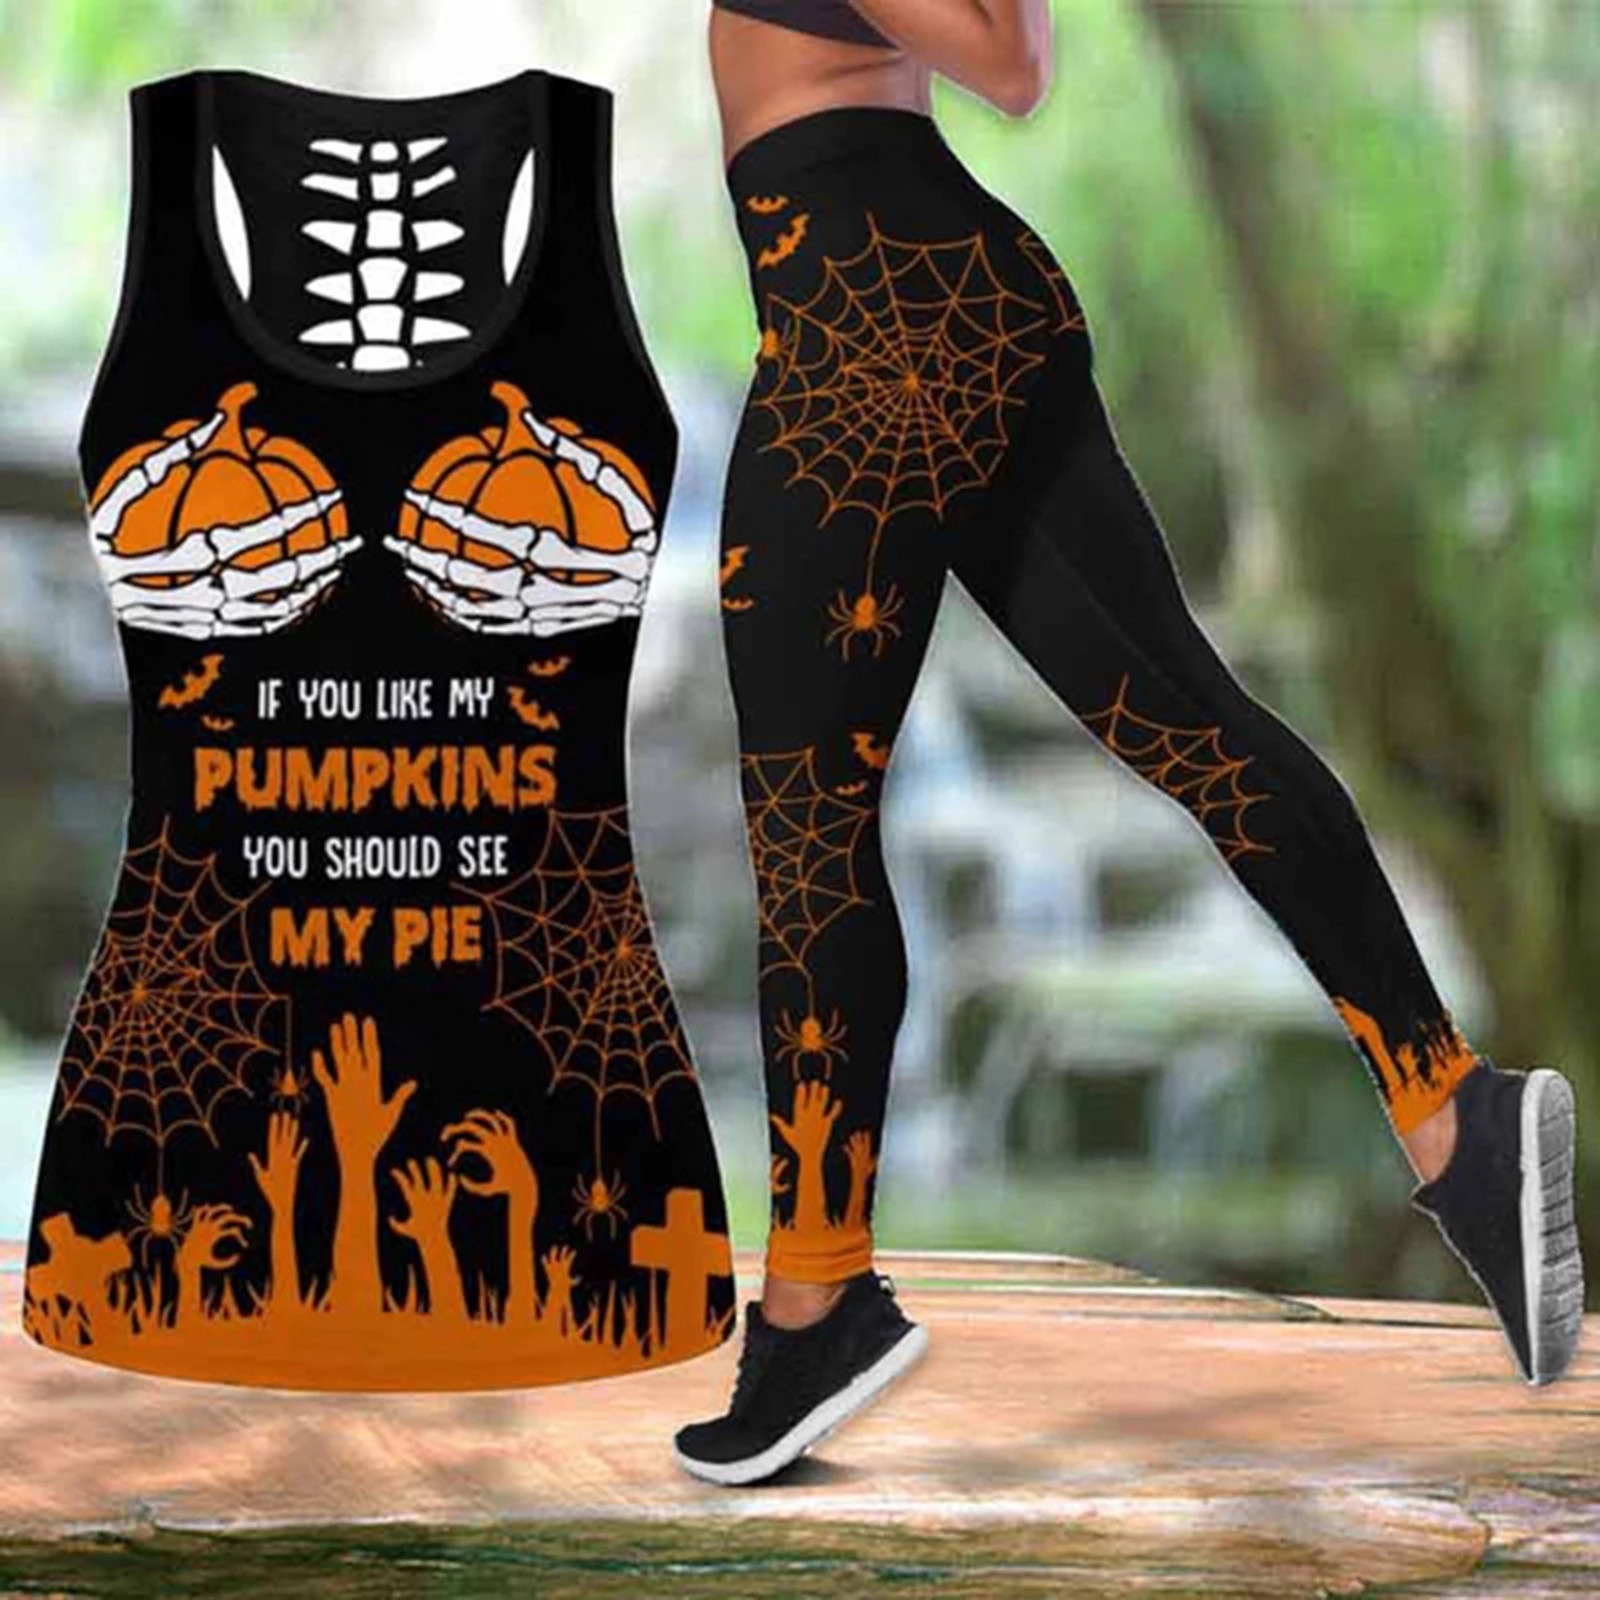 If you like my pumpkins you should see my pie halloween legging and hollow tank top – Hothot 160821